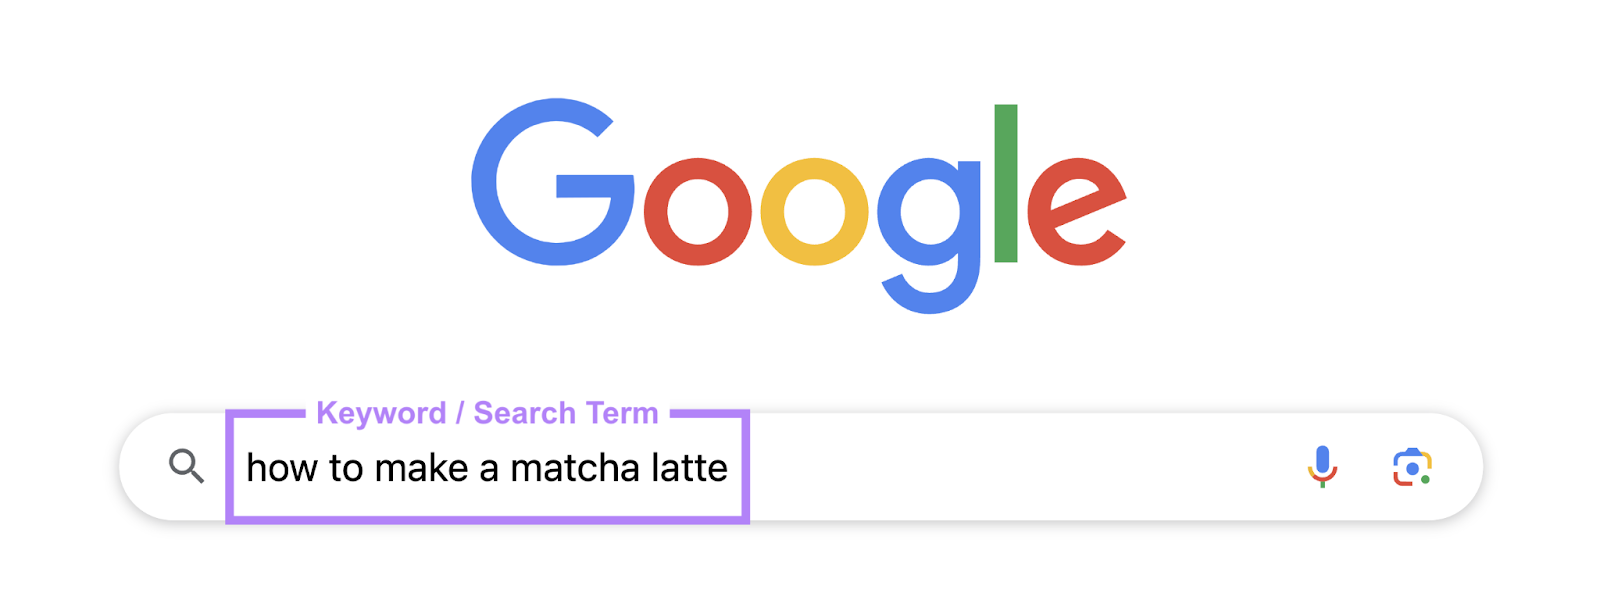 "how to make a matcha latte" search term entered into Google